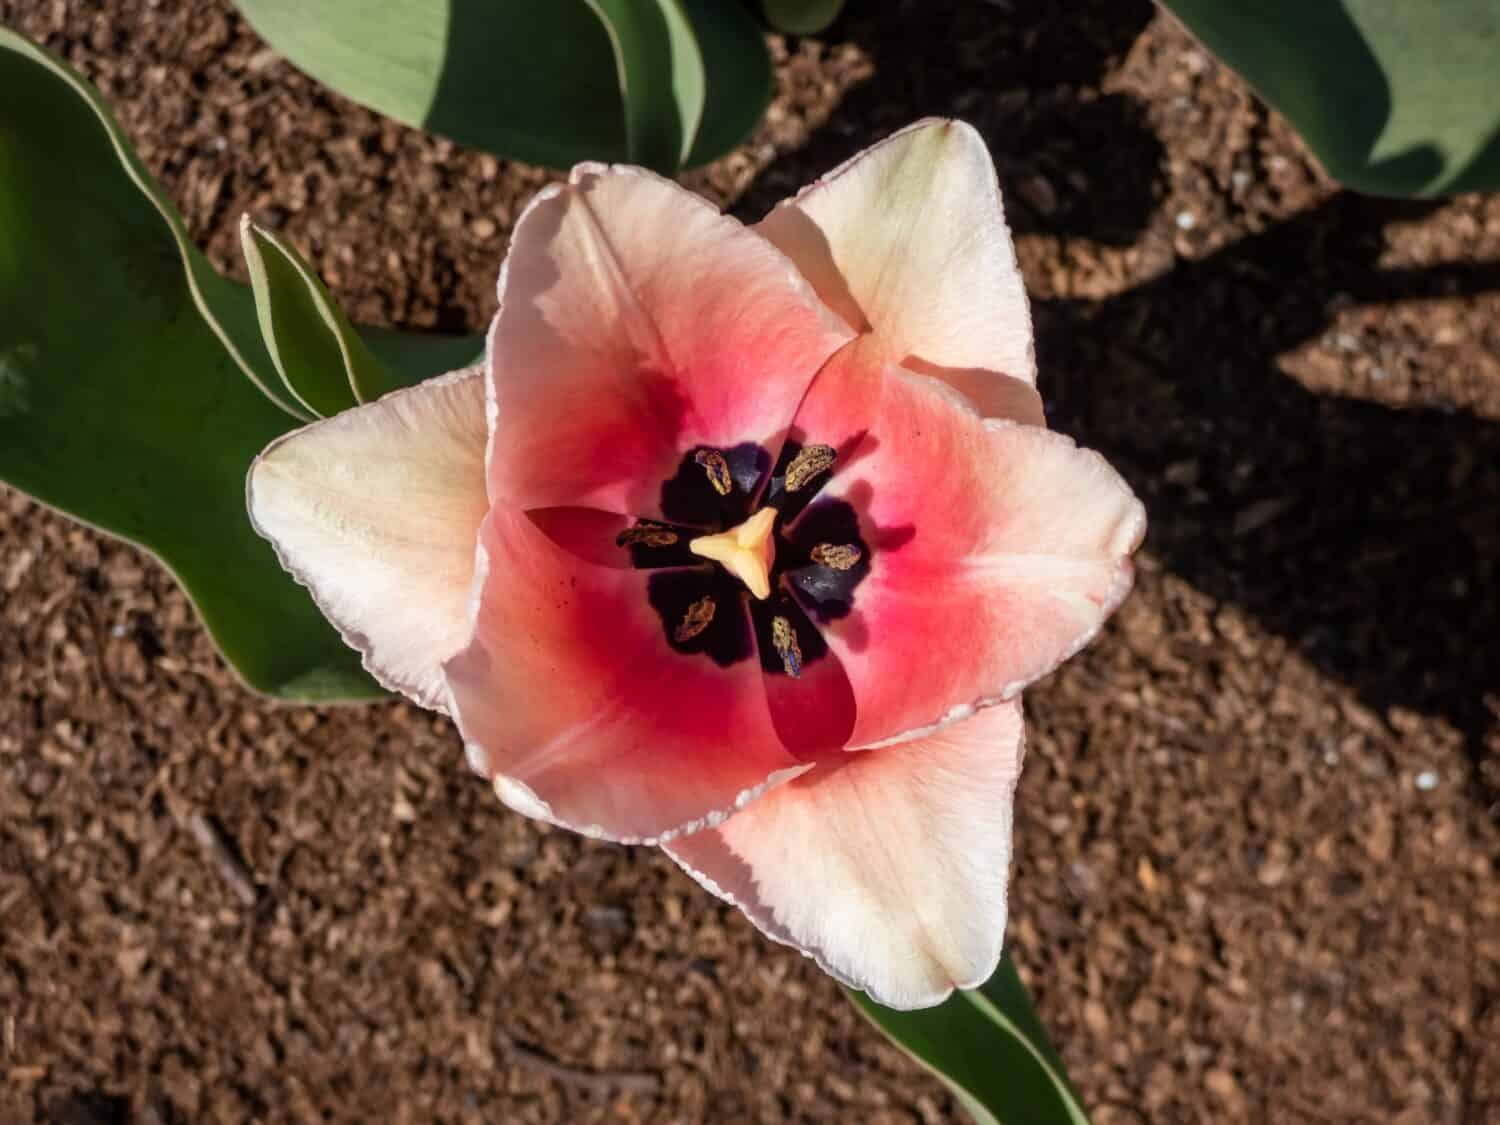 Tulip Salmon Impression with pale pink gently flushed with apricot- pink flowers. The flowers are large and goblet shaped held on tall strong stems. The inner petals are deep salmon with a bluish base